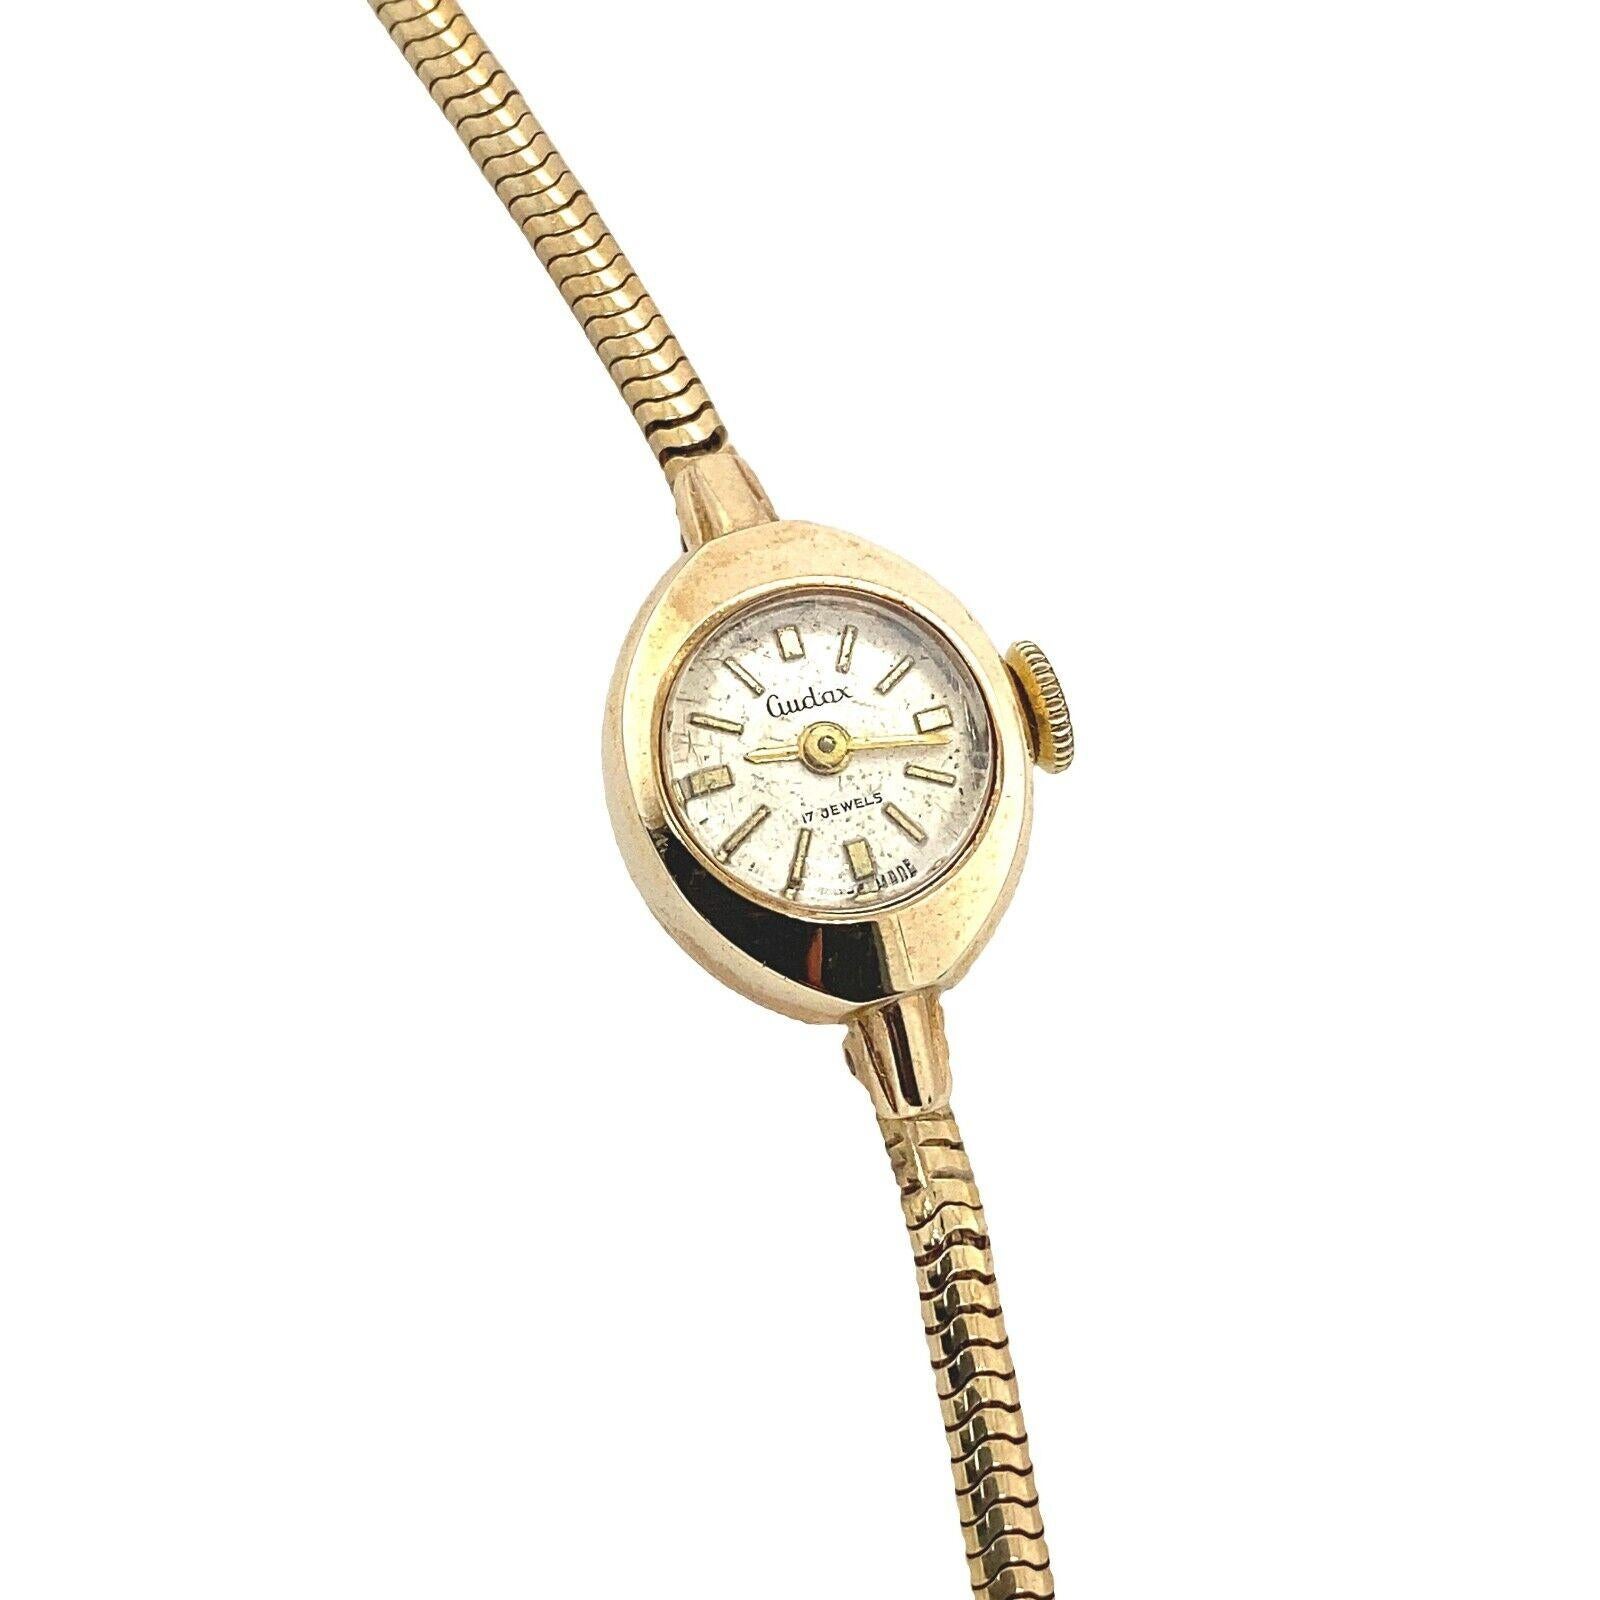 Vintage 9ct Gold Audax Watch, In 9ct Gold Wristwear With Cream Dial

Vintage 9ct gold Audax watch, with cream dial and arrow markers. In 9ct gold wristwear snake bracelet.

Additional Information:
Case Size: 15mm
Case Thickness: 8mm
Strap Width: